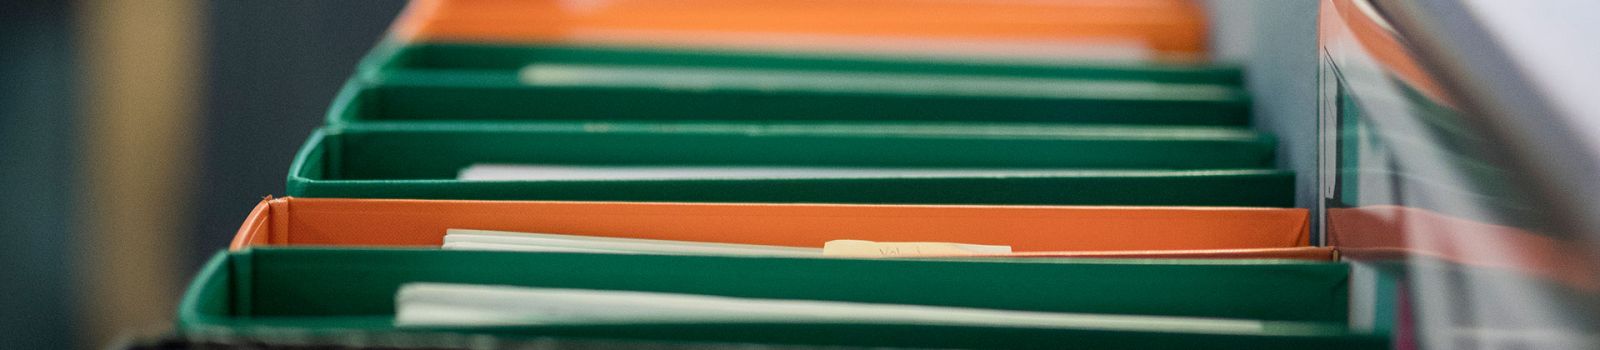 Image of rows of green and orange files  banner image